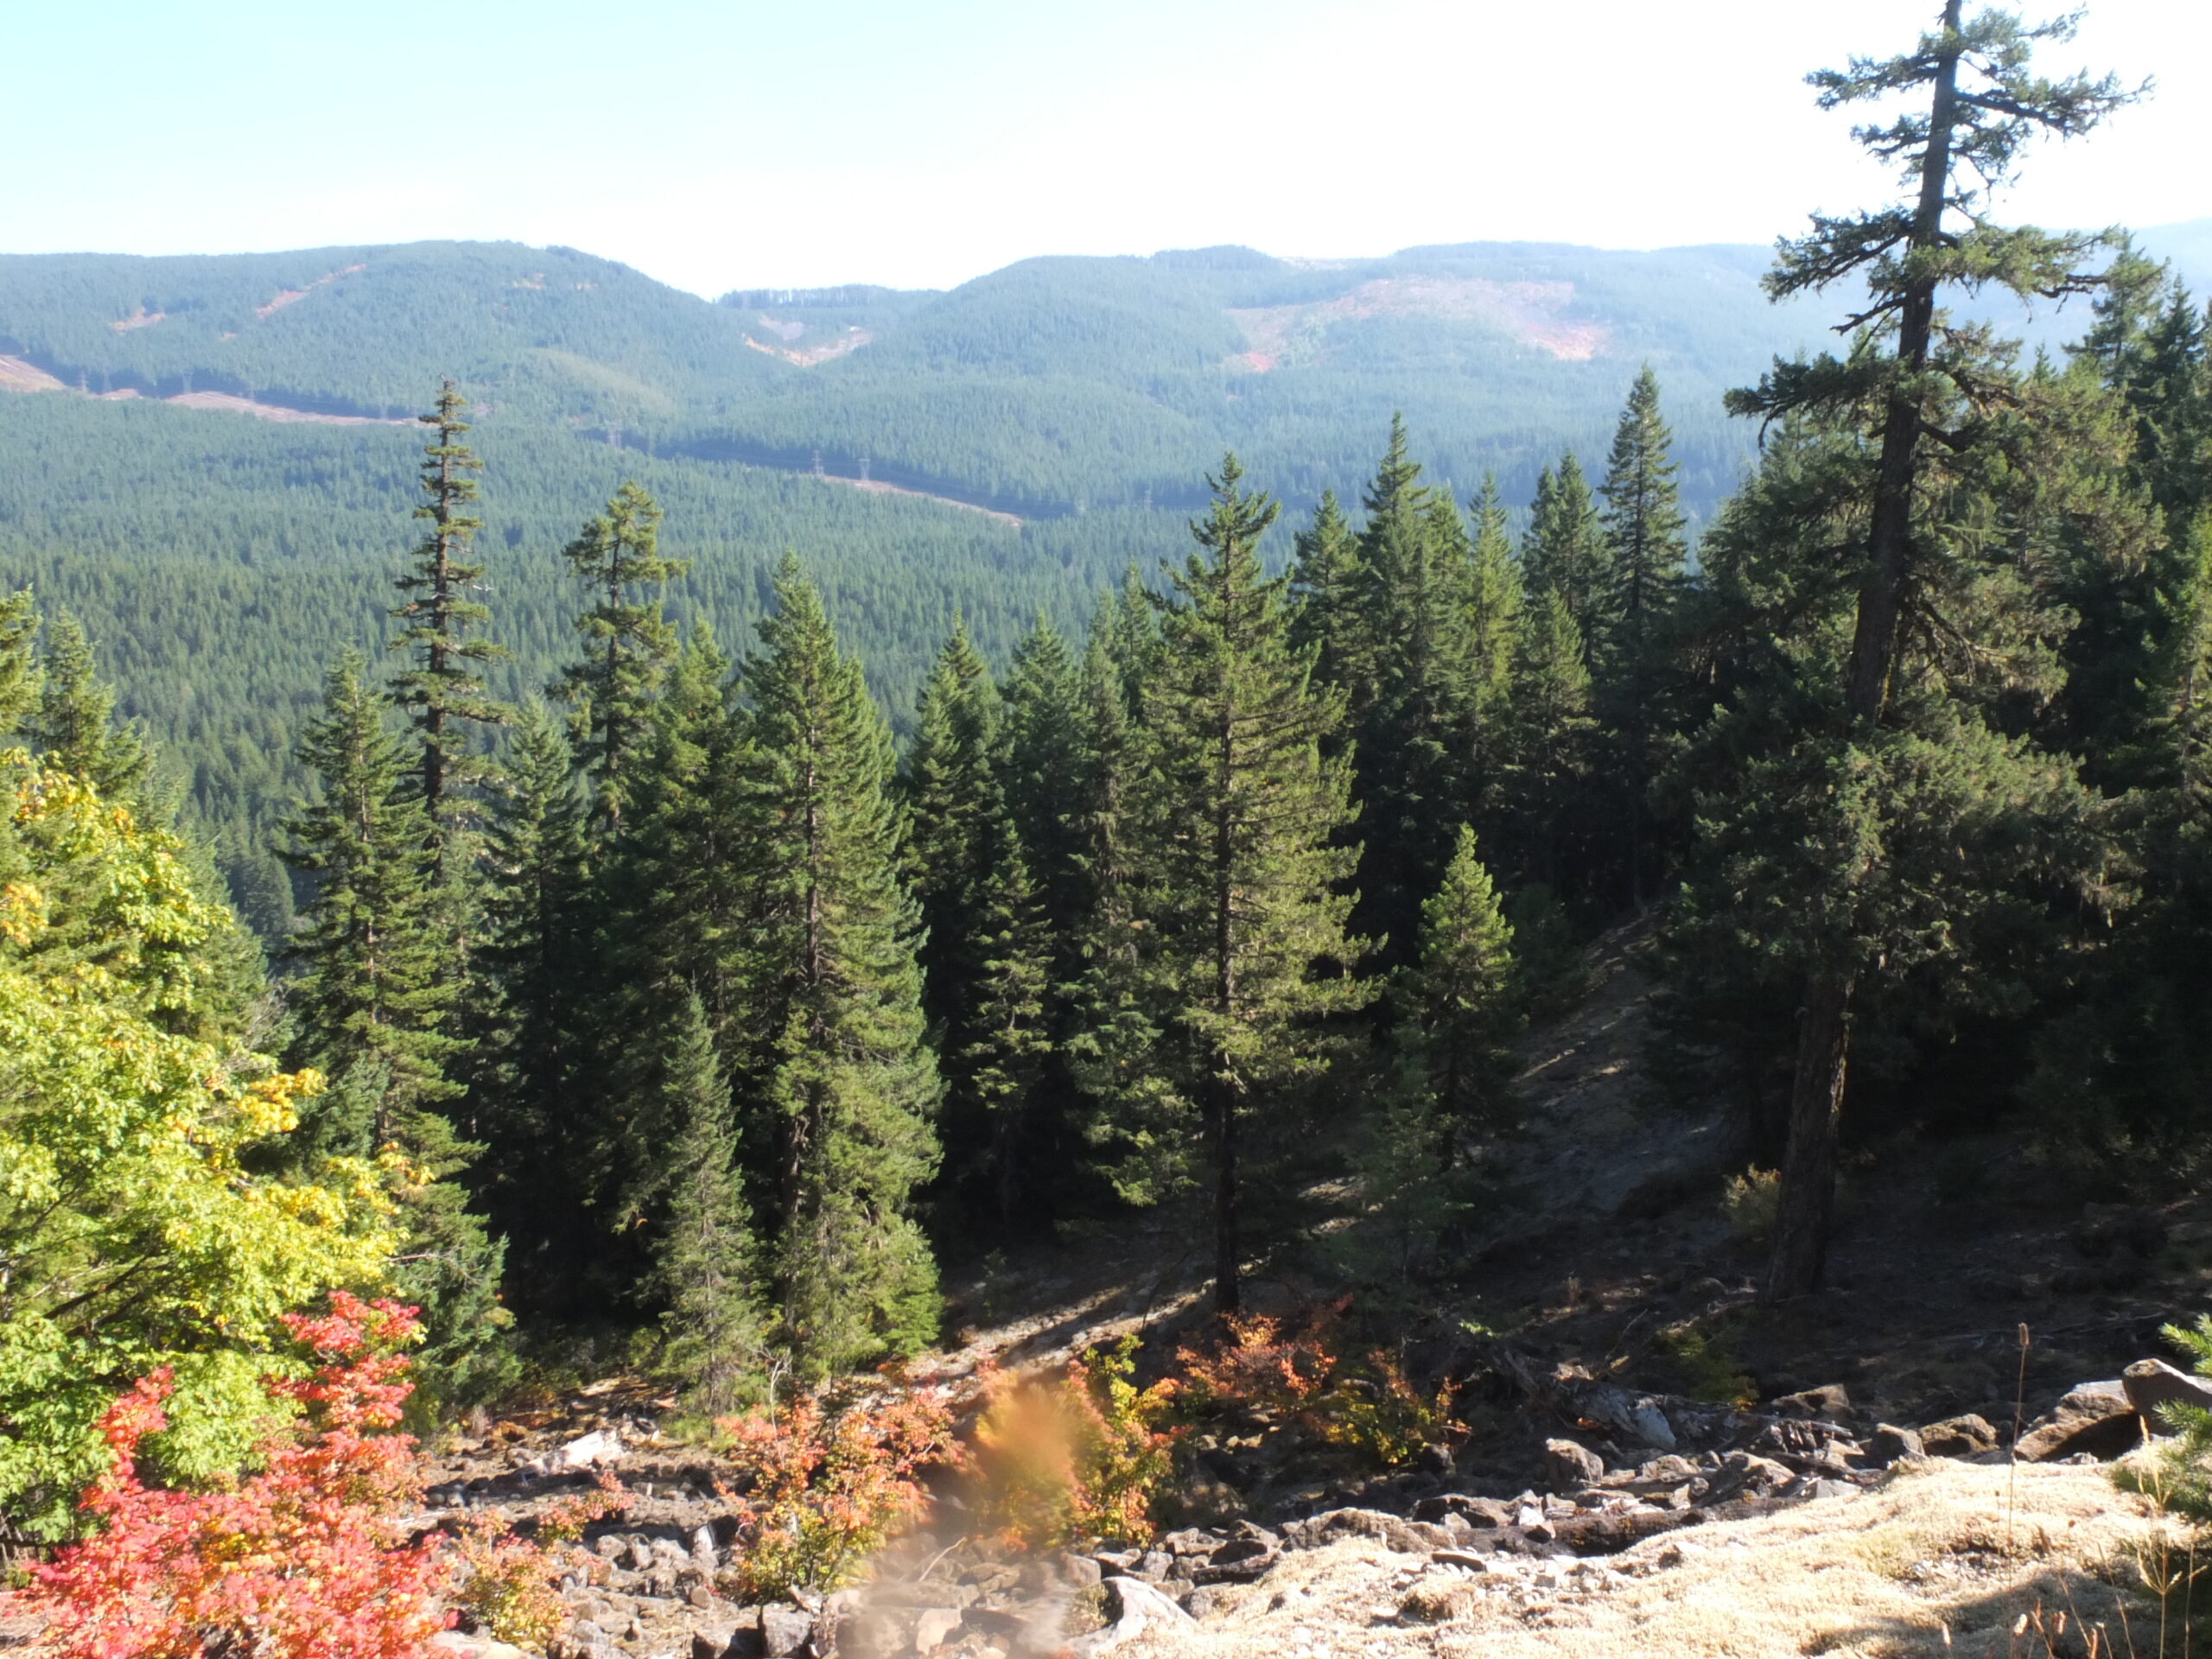 Looking at a downwards rocky slope, with some dried dead trees with red pin needles, there is a view of the forest in the foreground. In the far distance are rolling hills.